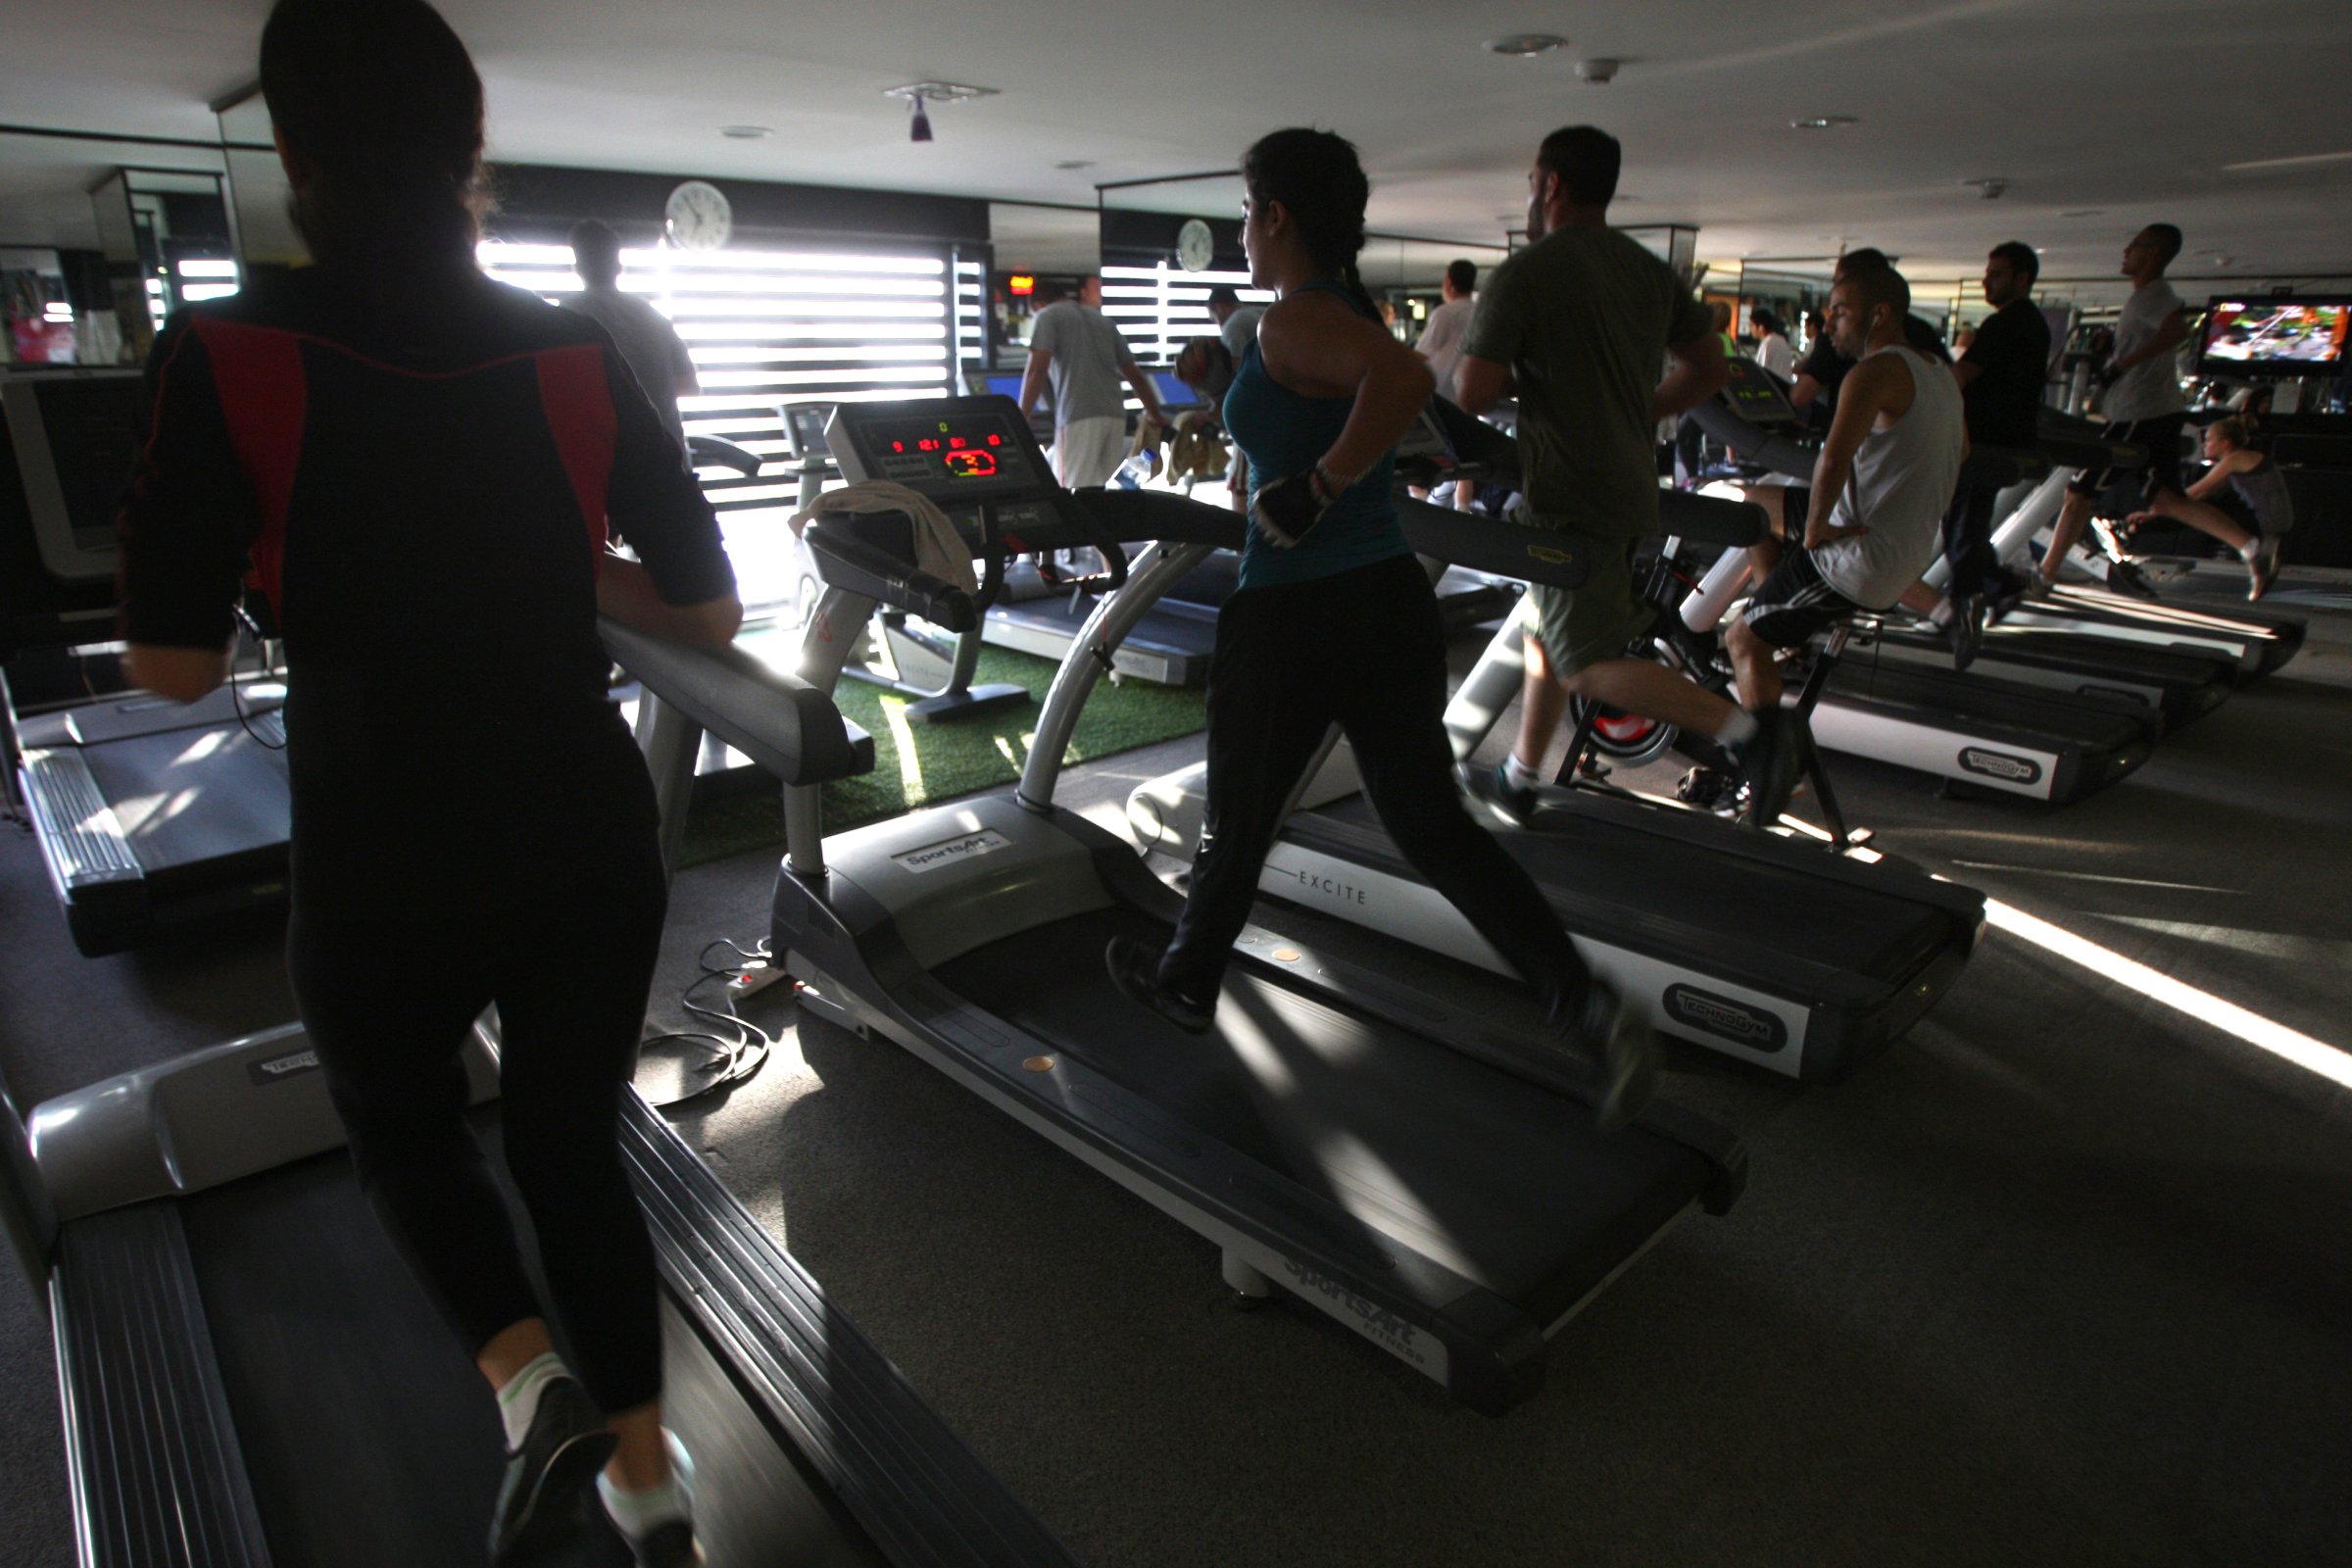 Men and women run on treadmills at a fitness gym in the West Bank city of Ramallah on June 25, 2012.